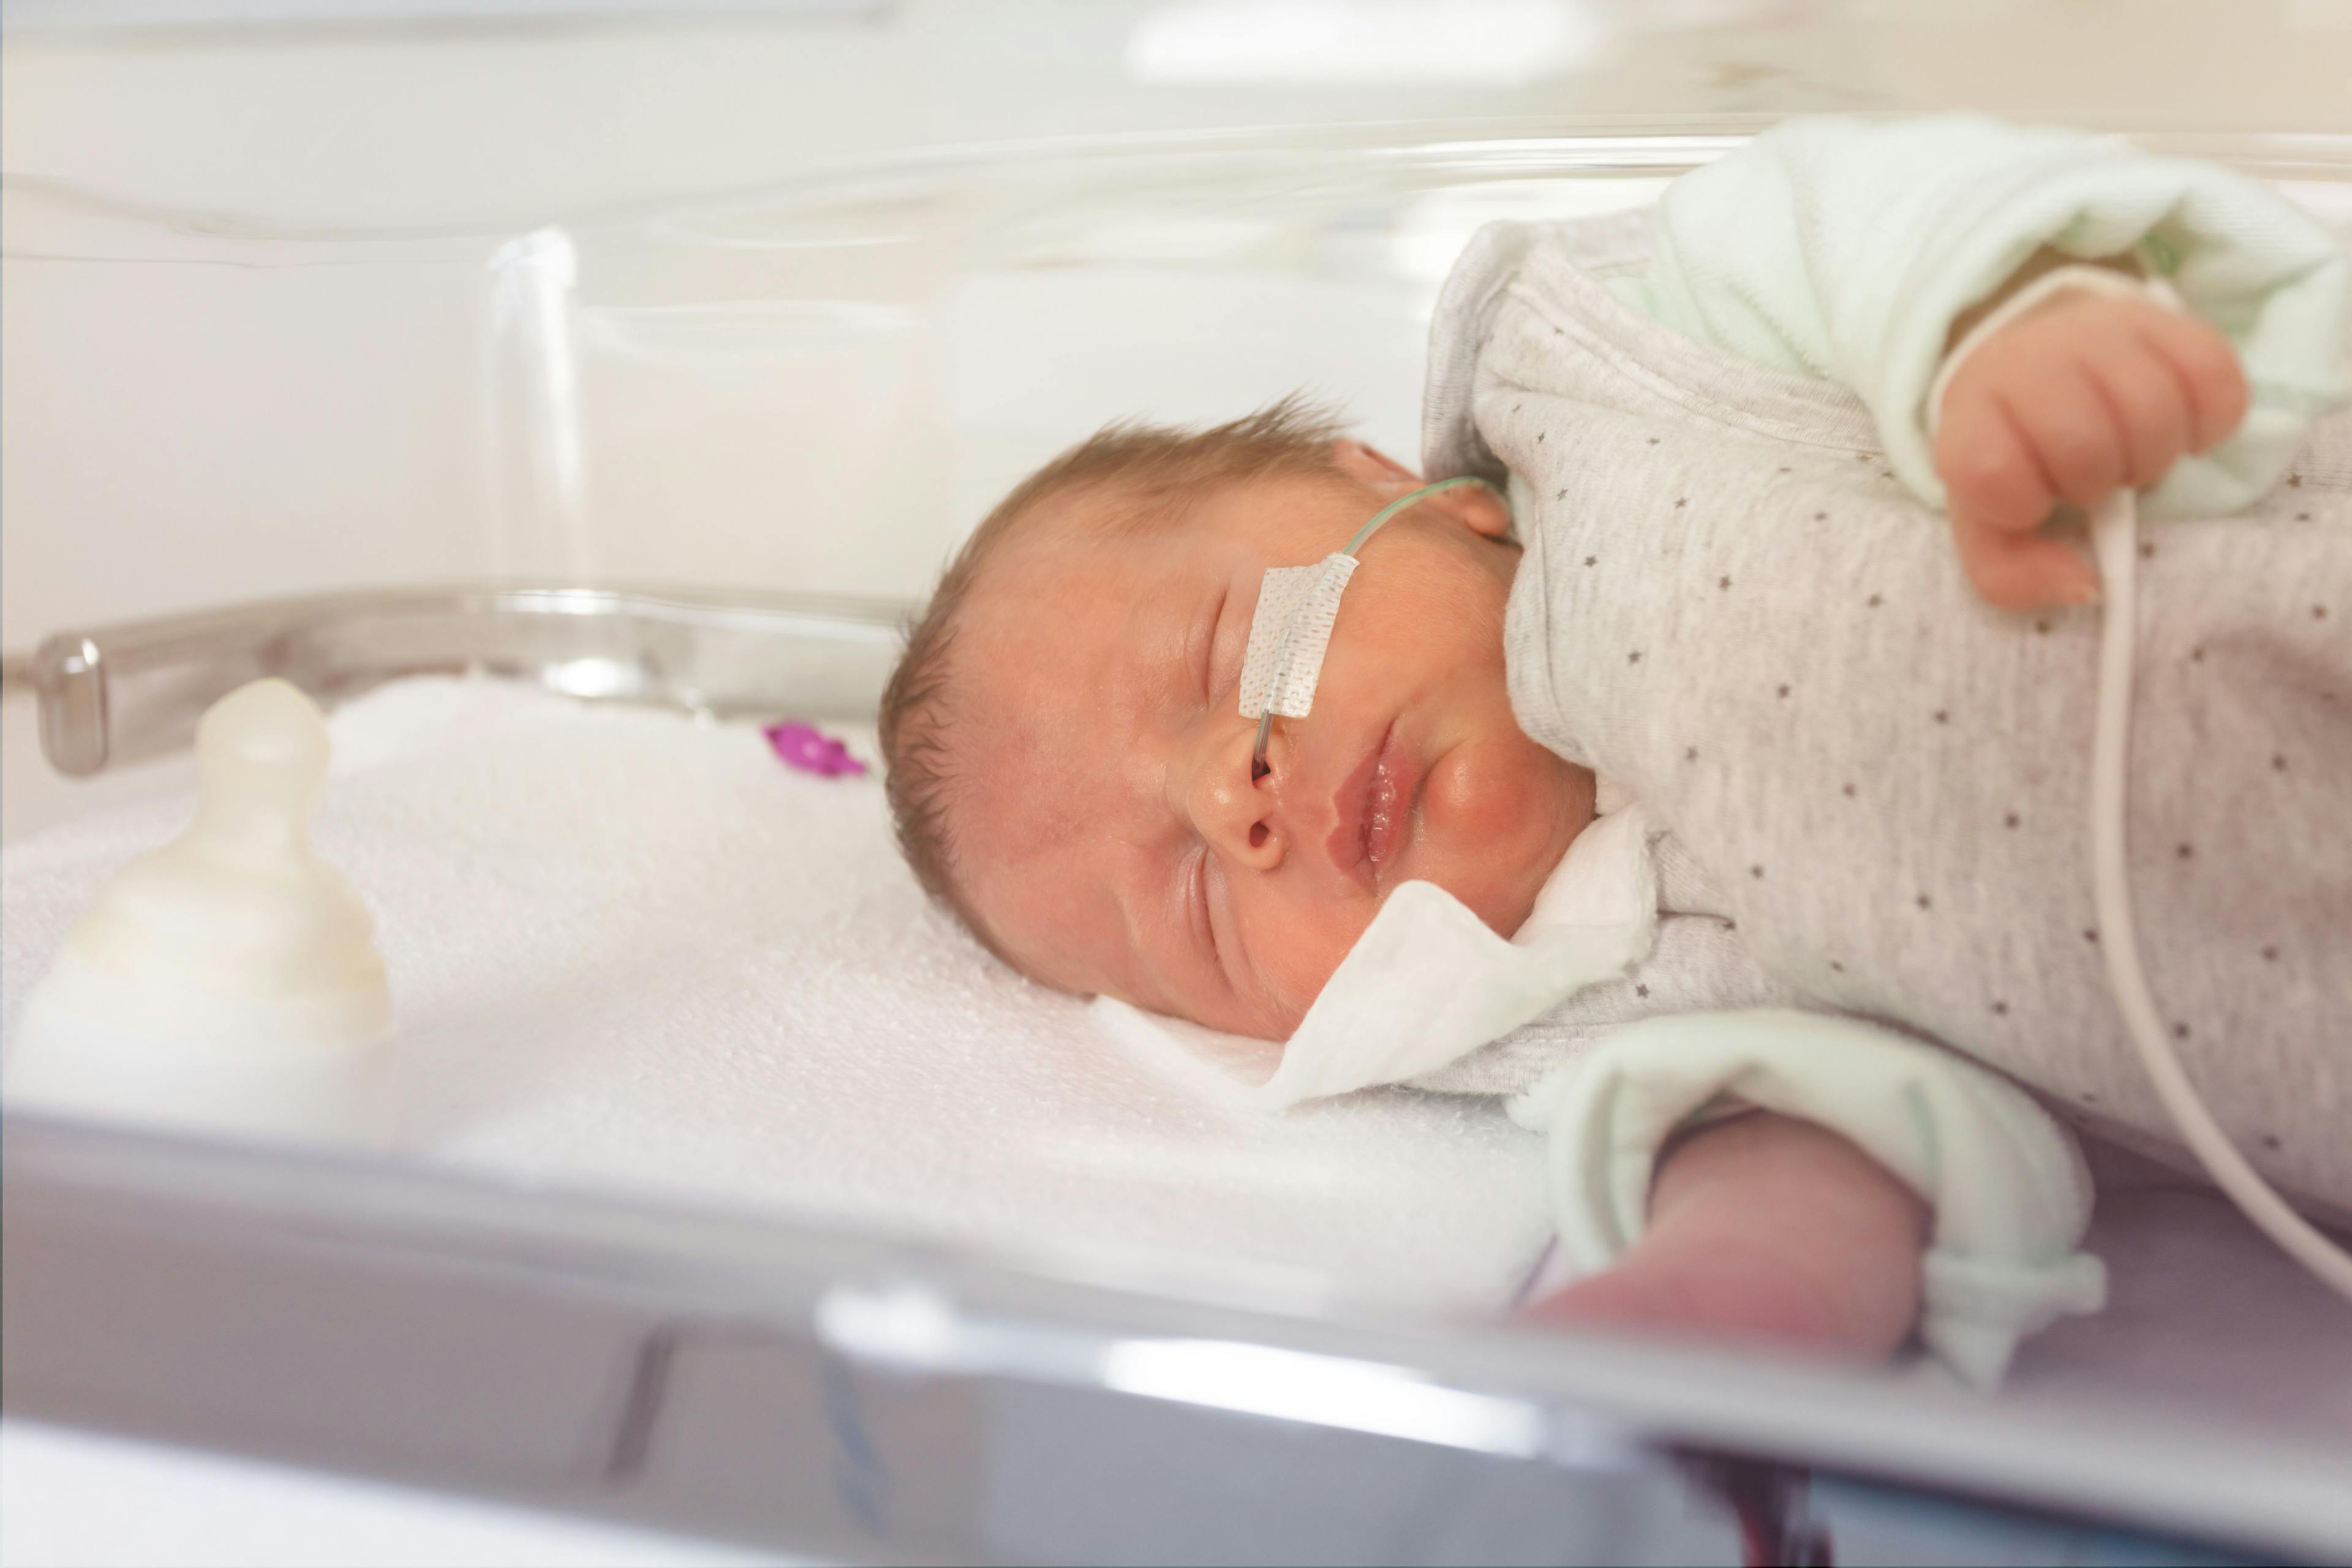 Characteristics of Infants Hospitalized With COVID-19